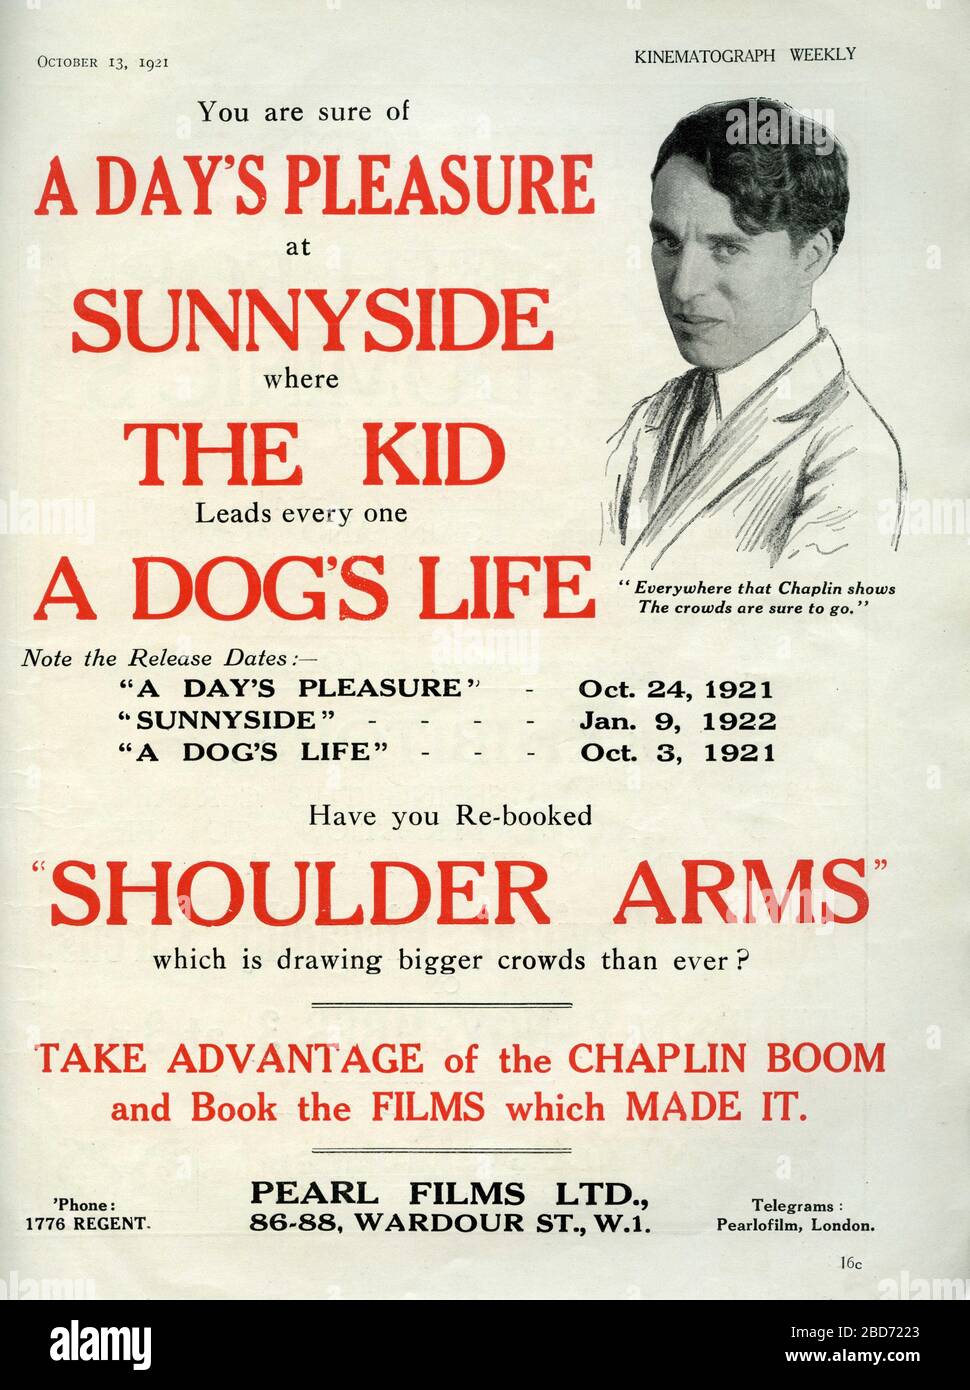 CHARLIE CHAPLIN in A DAY'S PLEASURE / SUNNYSIDE / THE KID / A DOG'S LIFE and a reissue of SHOULDER ARMS 1921 Charles Chaplin Productions / Pearl Films Ltd / First National Pictures Stock Photo